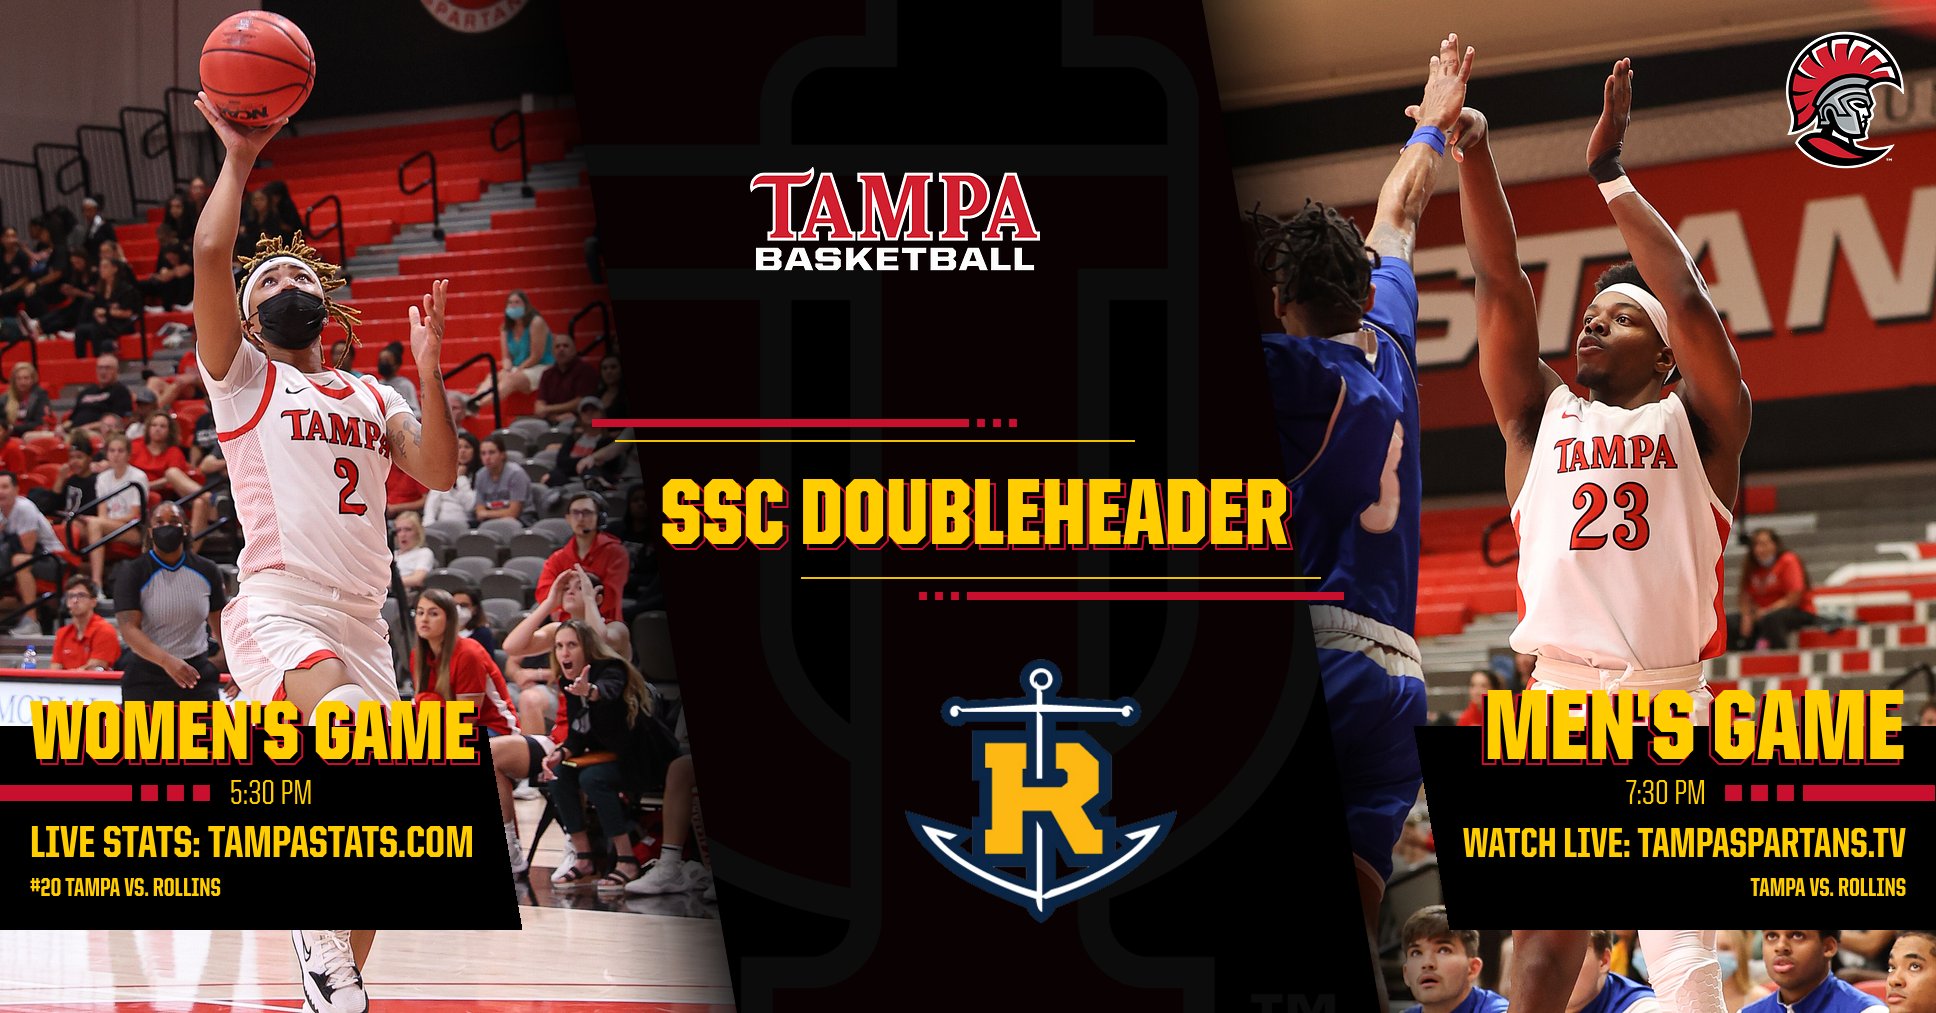 University of Tampa Basketball vs. Rollins College